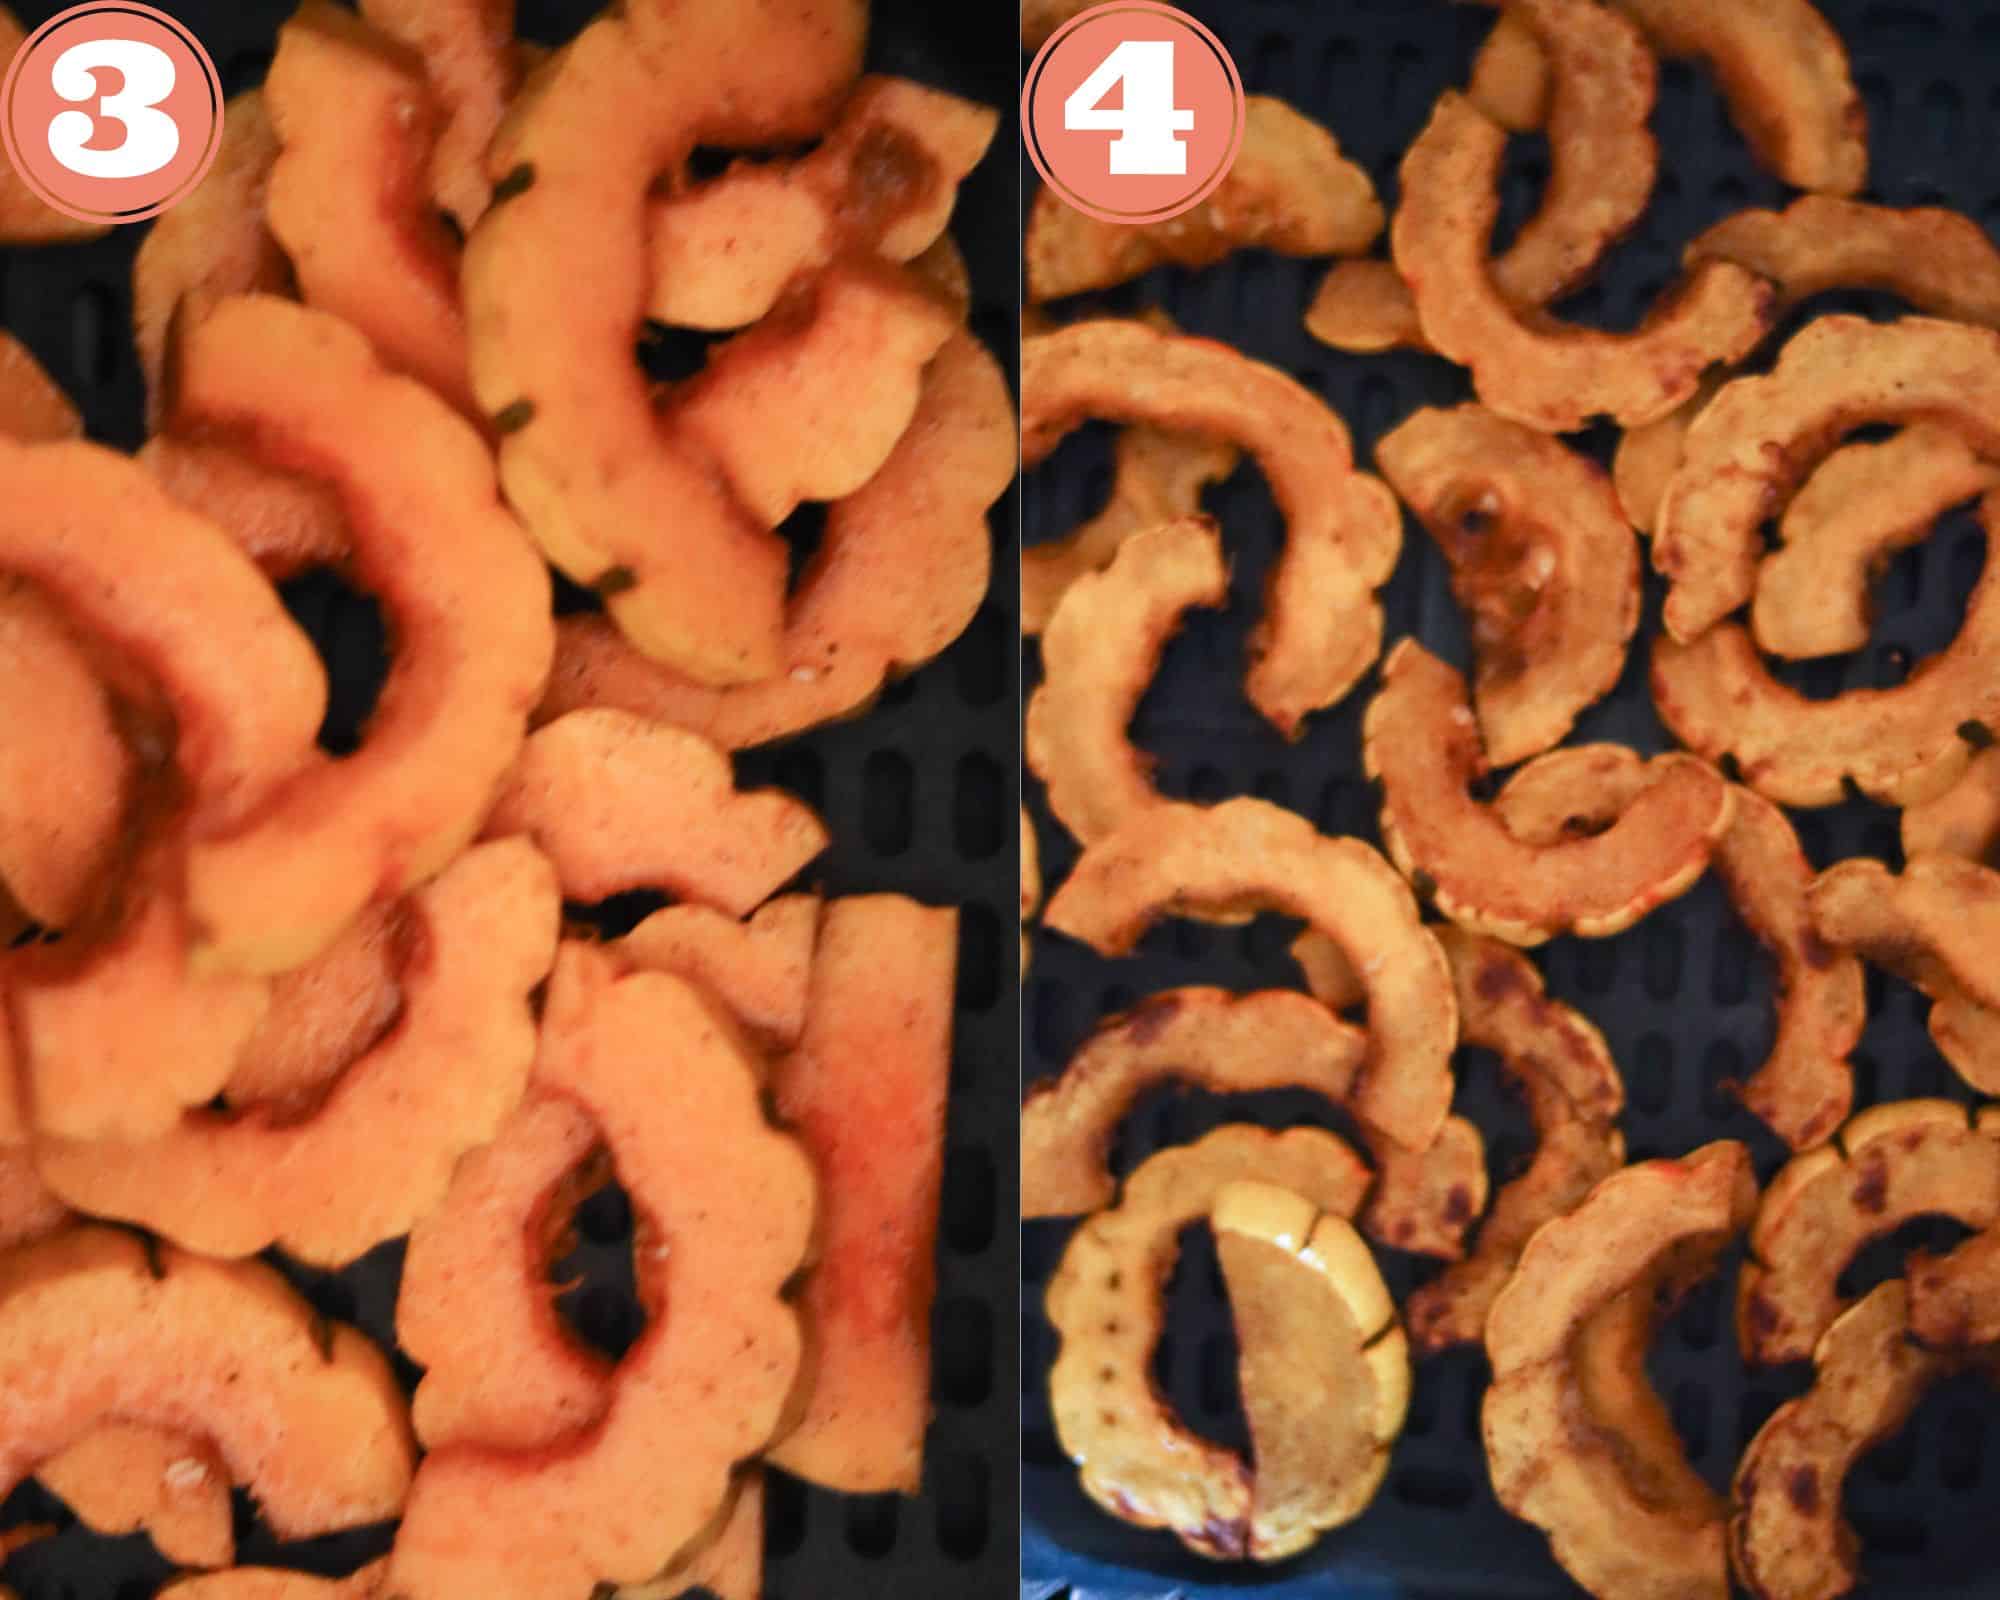 Photos of Delicata Squash in the air fryer before and after cooking.